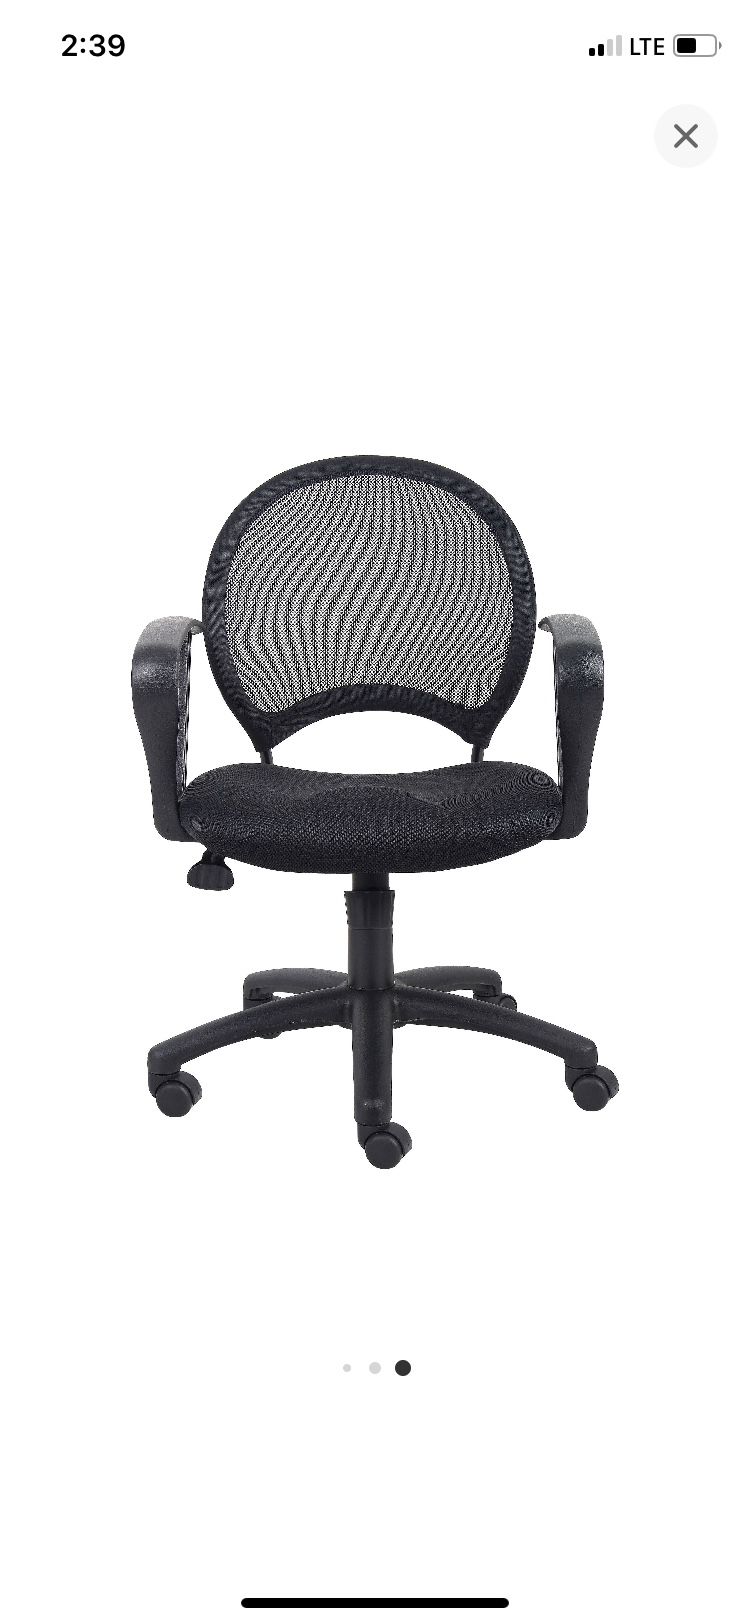 Mesh office chair with loop arms